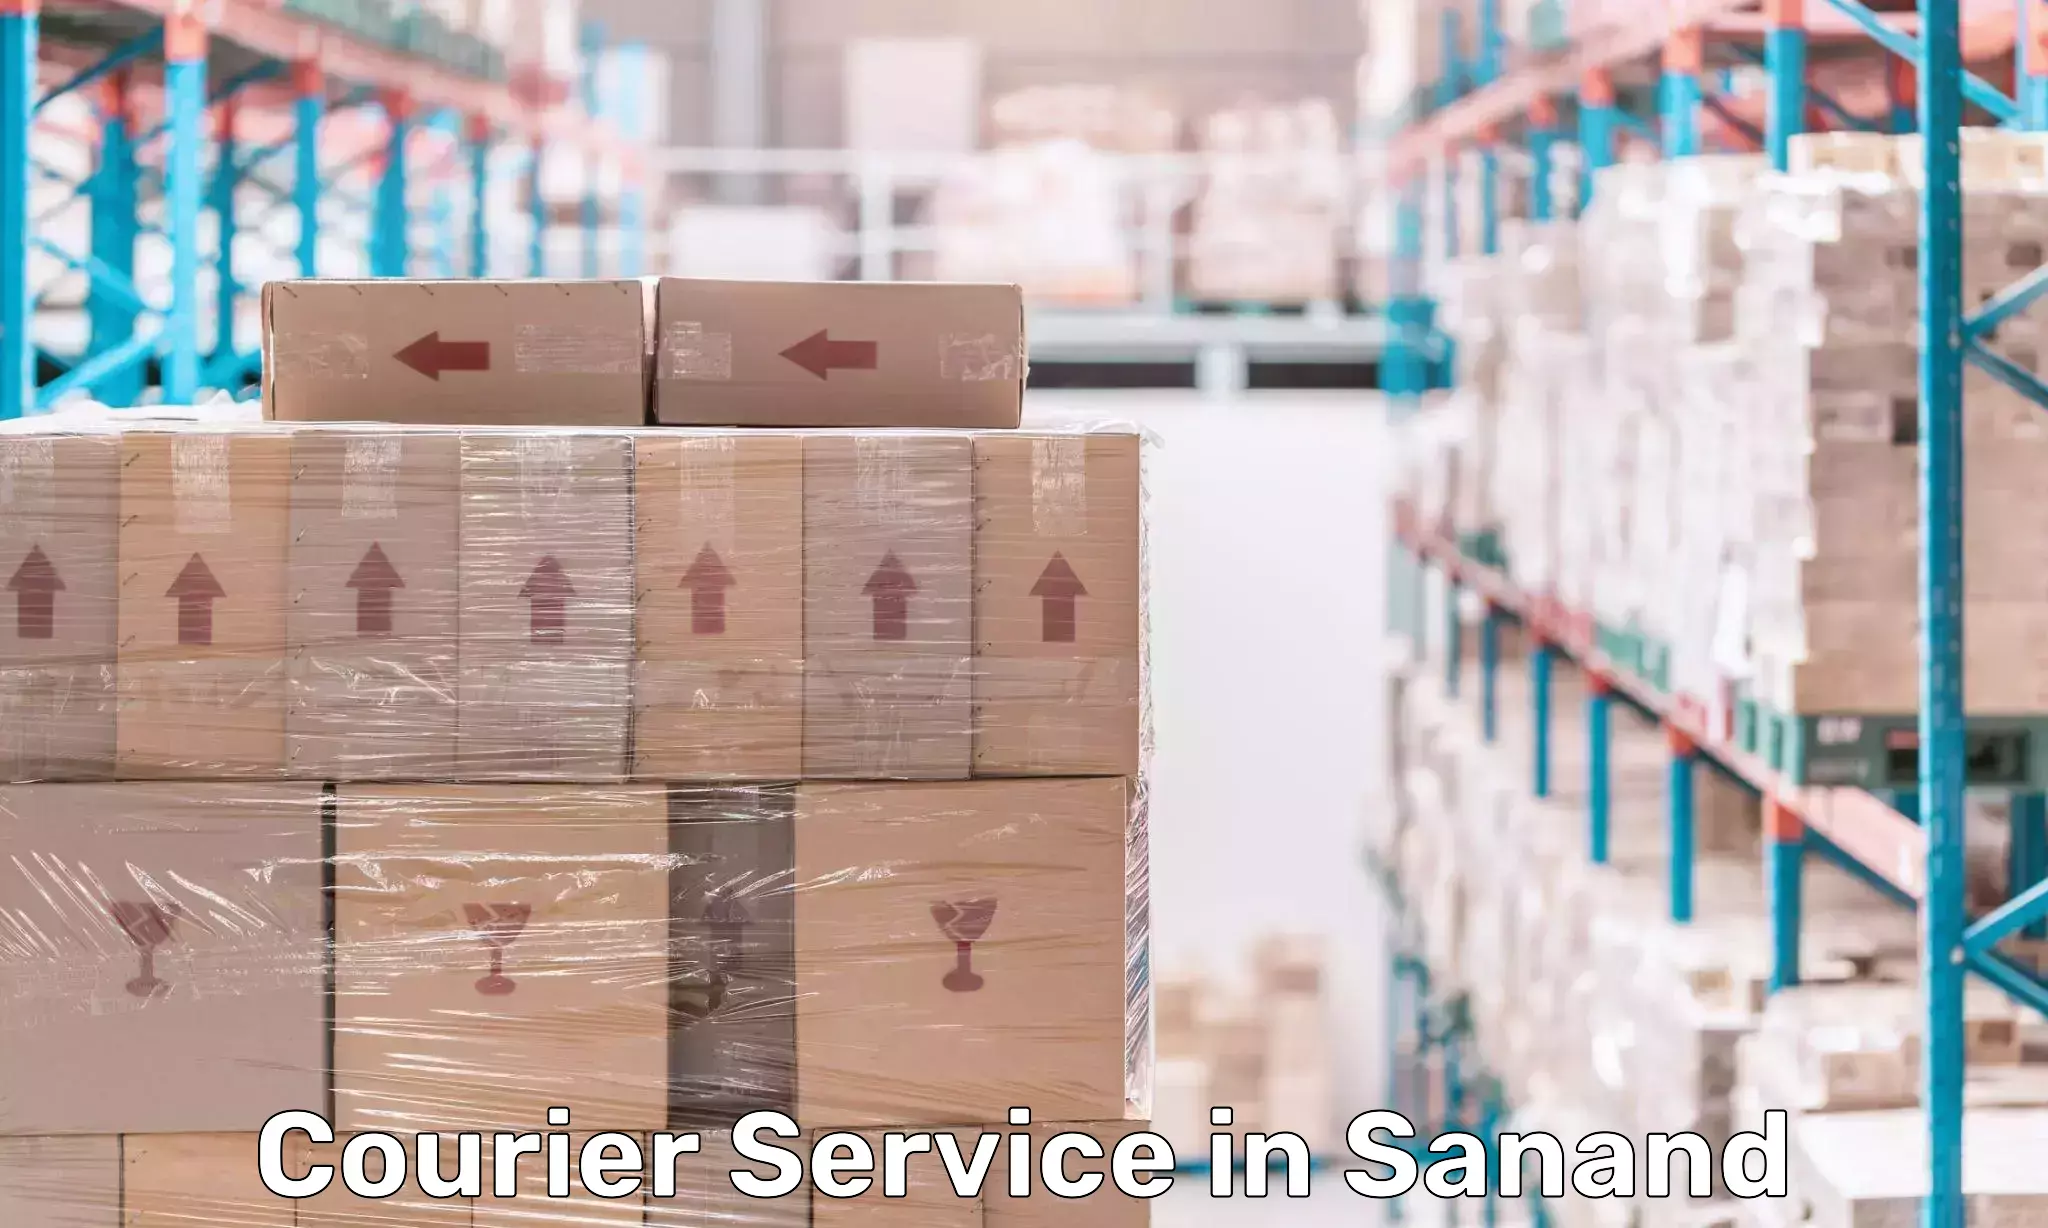 Logistics solutions in Sanand